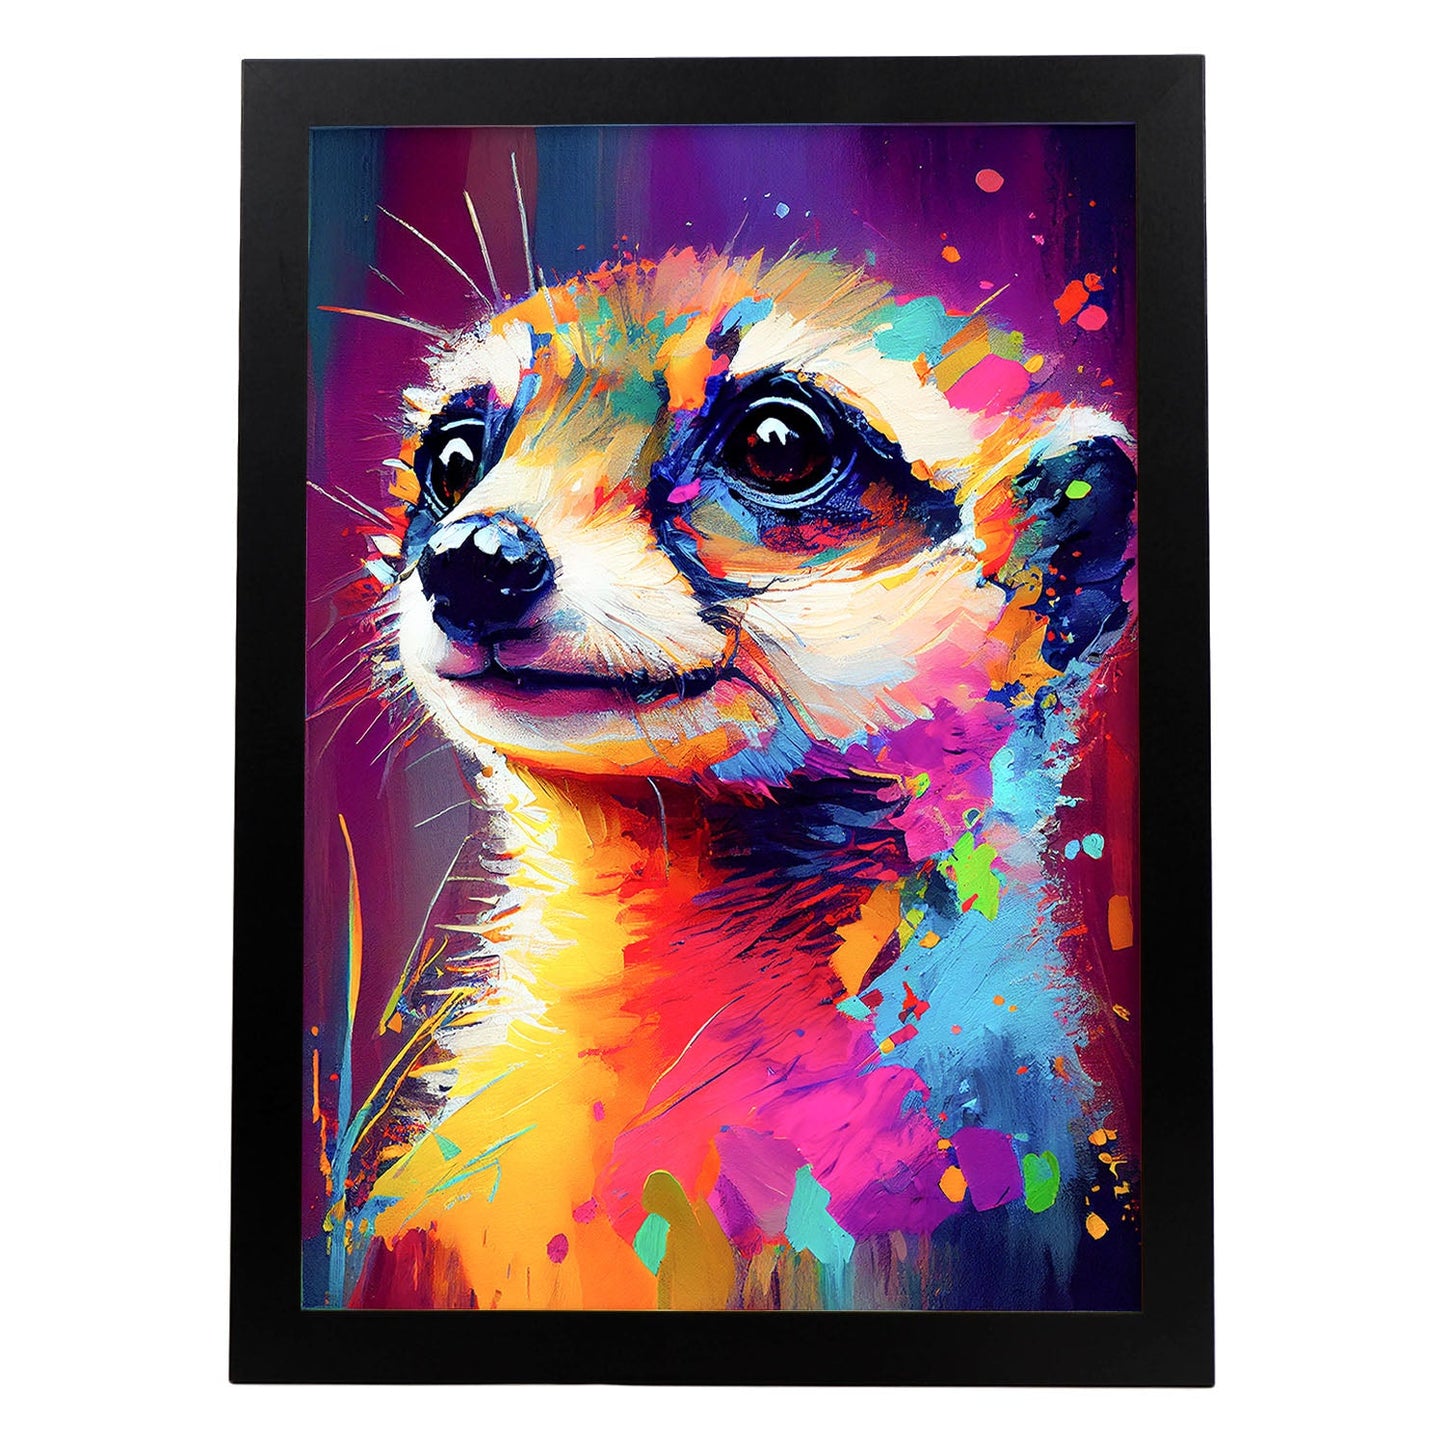 Nacnic Abstract smiling Meerkat in Lisa Fran Style_2. Aesthetic Wall Art Prints for Bedroom or Living Room Design.